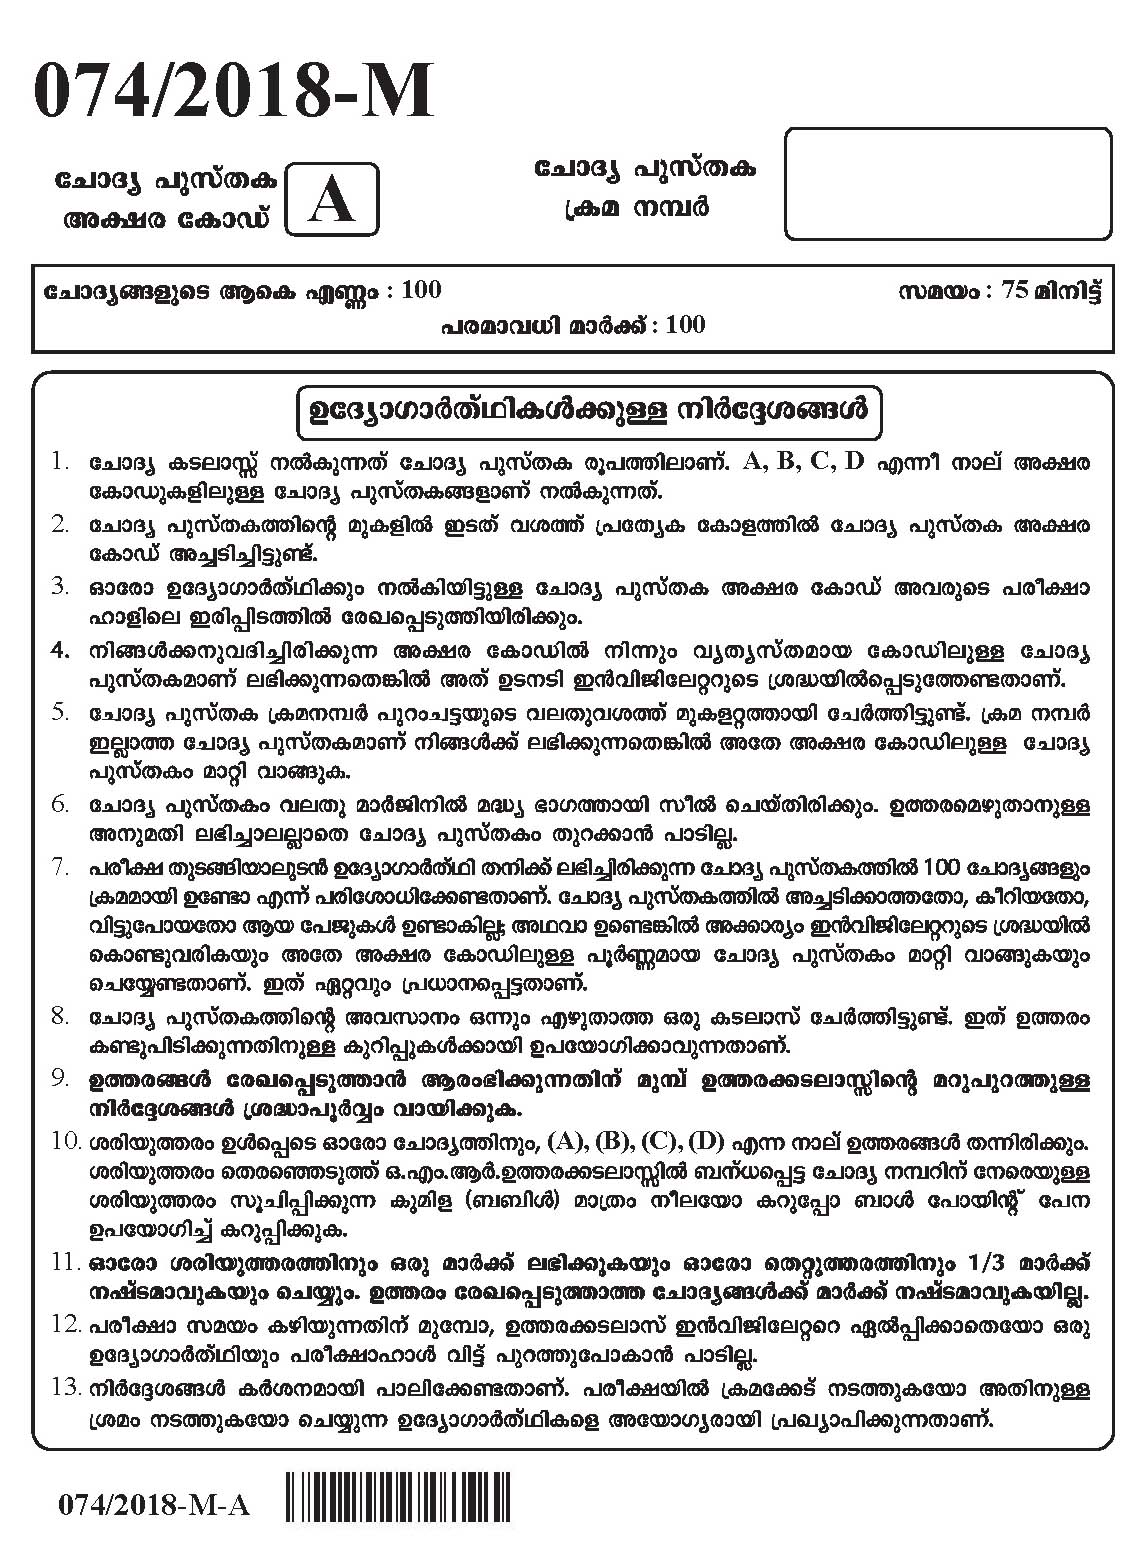 Kerala PSC Police Constable Driver Exam 2018 Question Paper Code 0742018 M 1